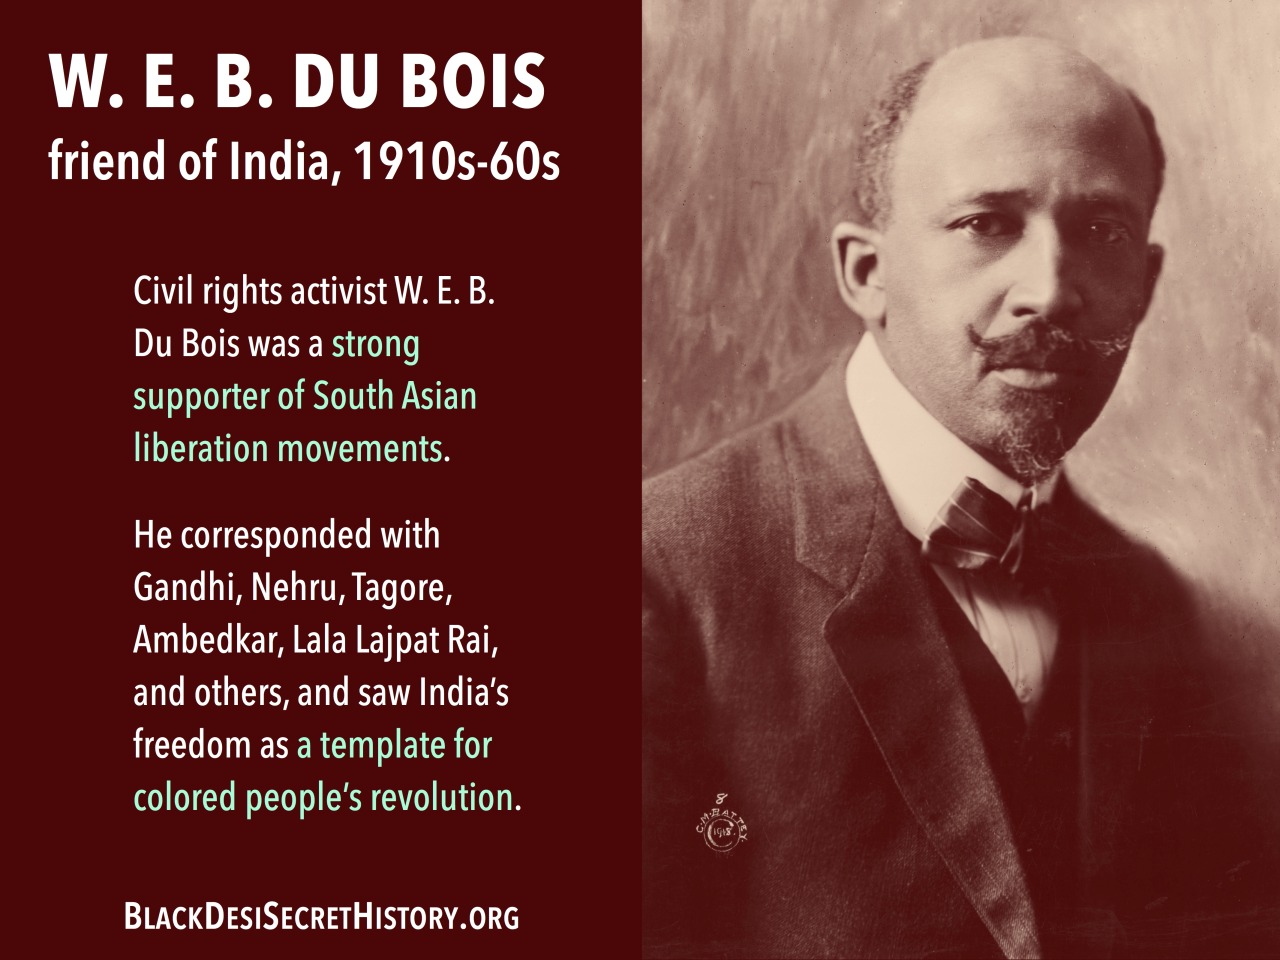 W. E. B. DU BOIS, friend of India, 1910s-60s: Civil rights activist W. E. B. Du Bois was a strong supporter of South Asian liberation movements.  He corresponded with Gandhi, Nehru, Tagore, Ambedkar, Lala Lajpat Rai, and others, and saw India’s freedom as a template for colored people’s revolution.